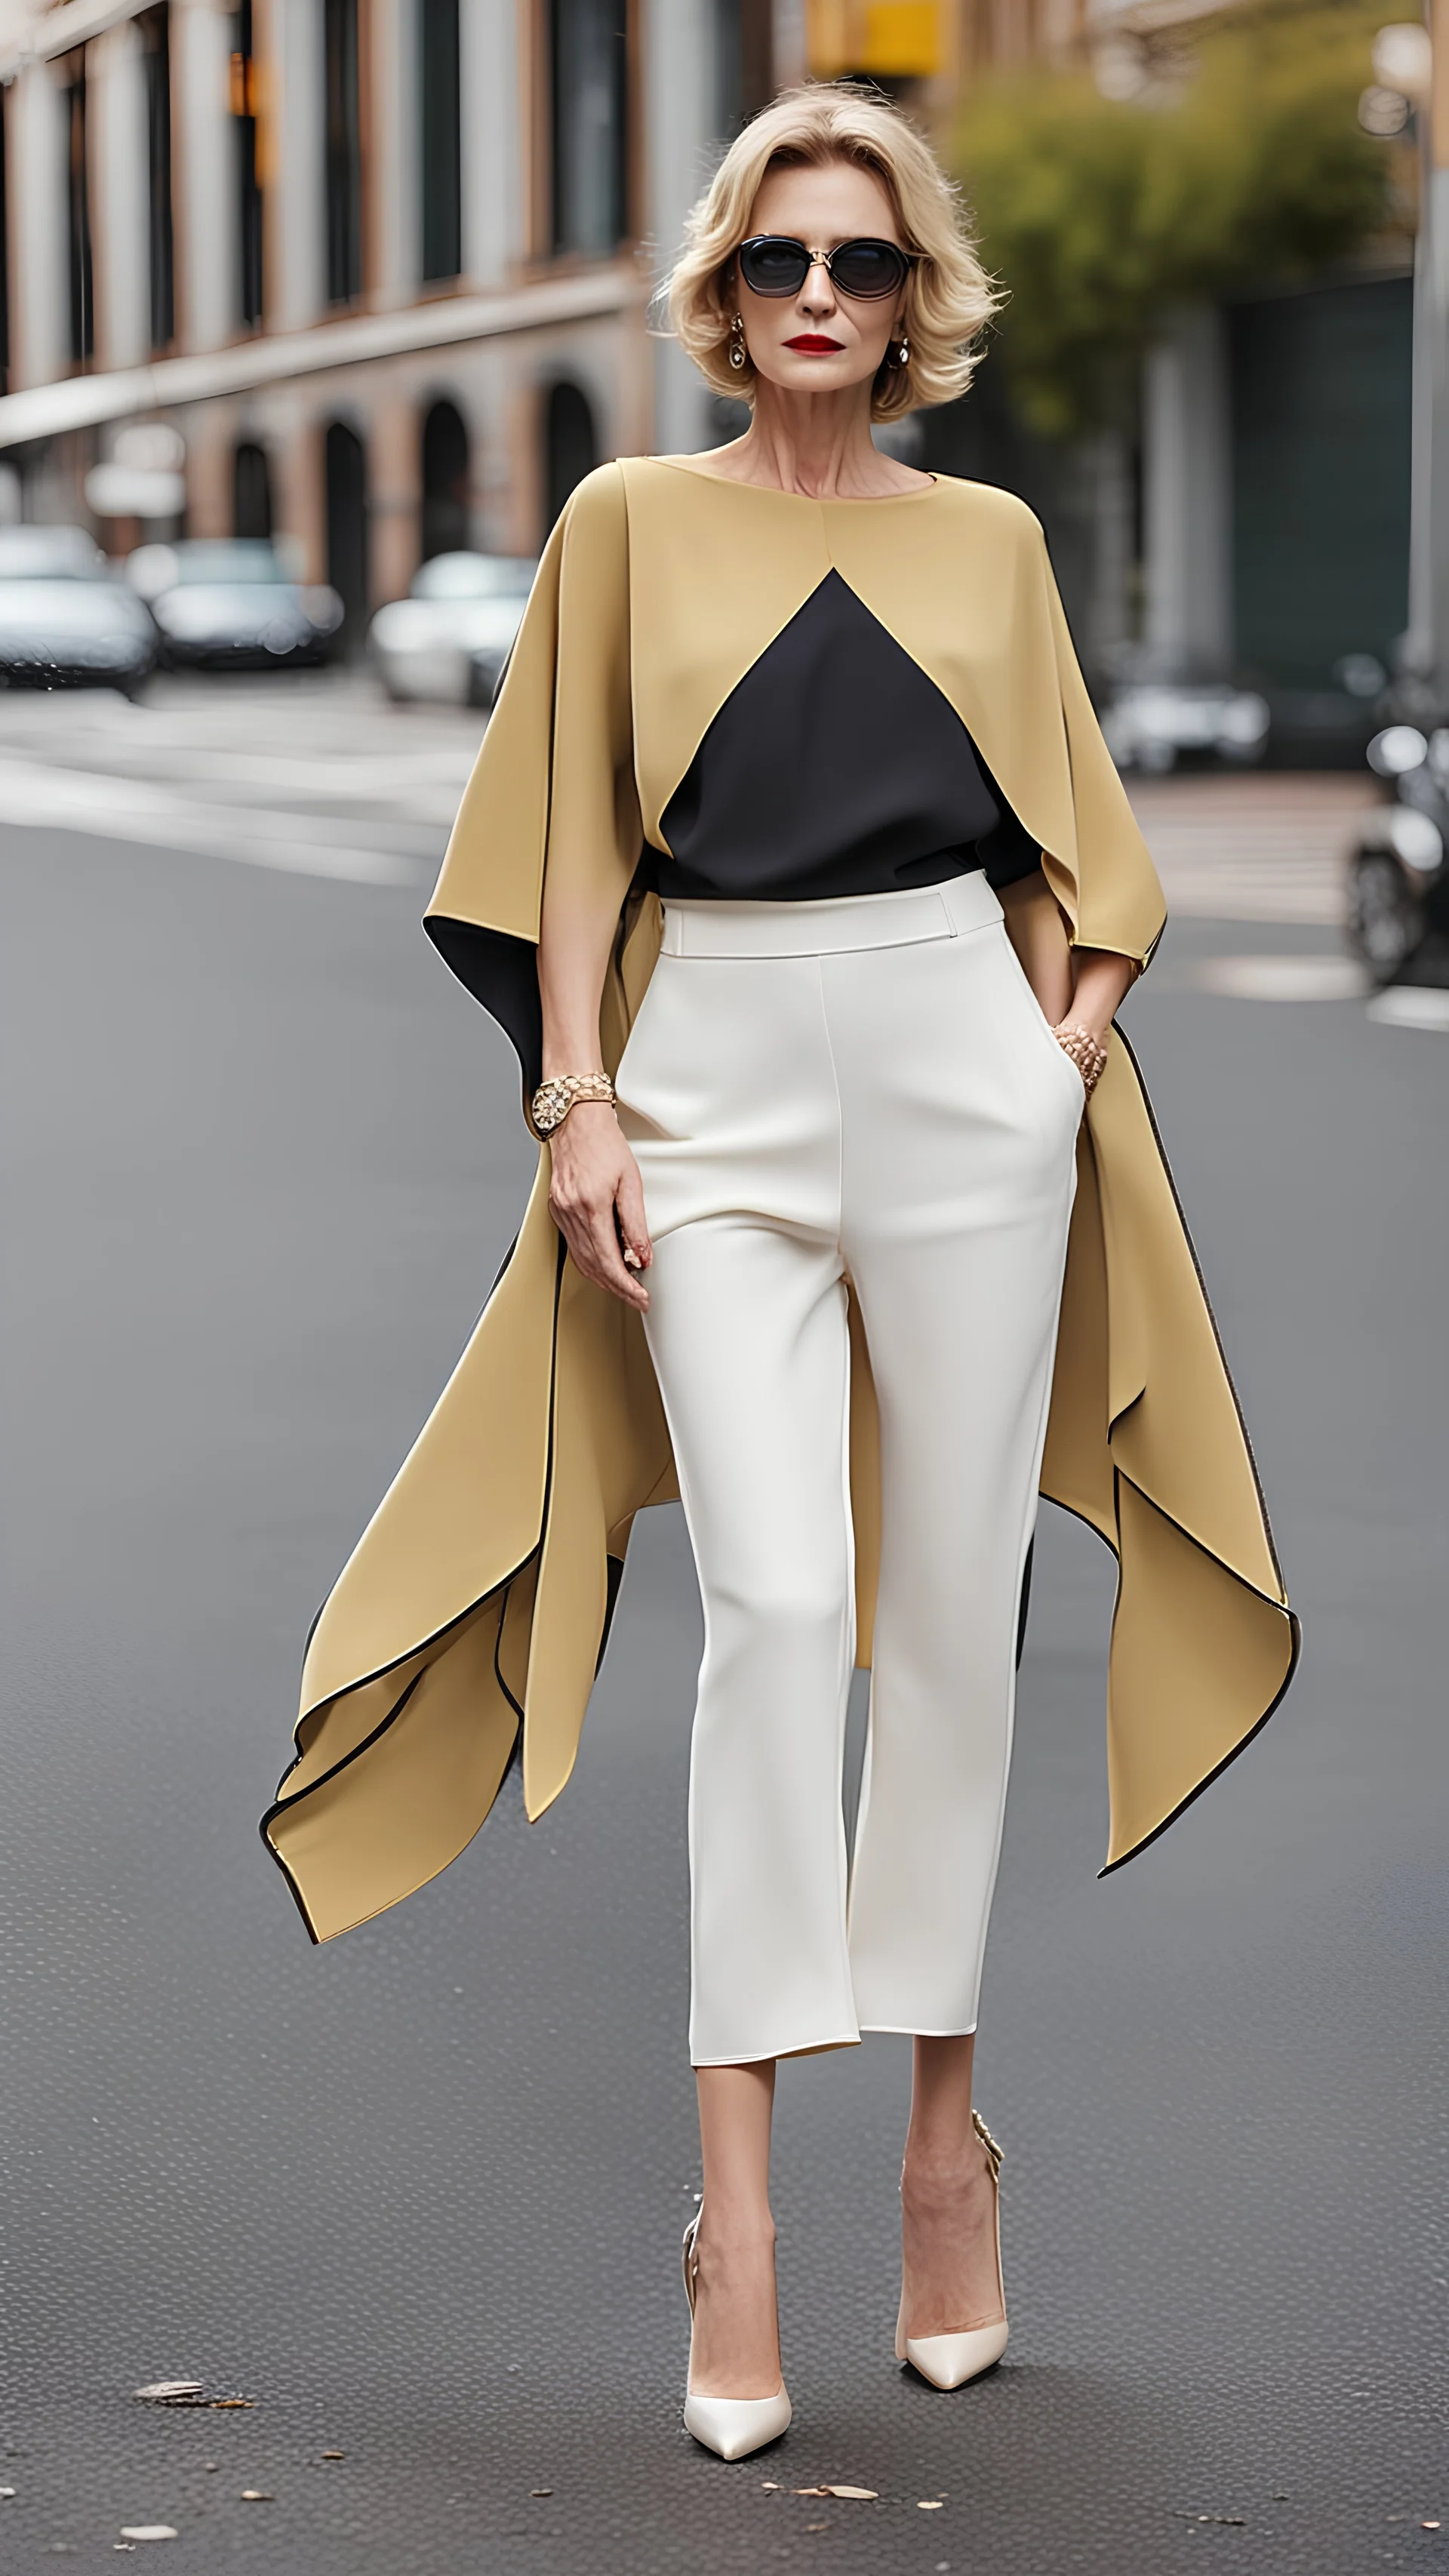 Fashion show walk onto the street. SHEIN Privé Batwing Sleeve Asymmetrical Hem Top & Trousers. beautiful pantsuit for autumn for middle-aged women